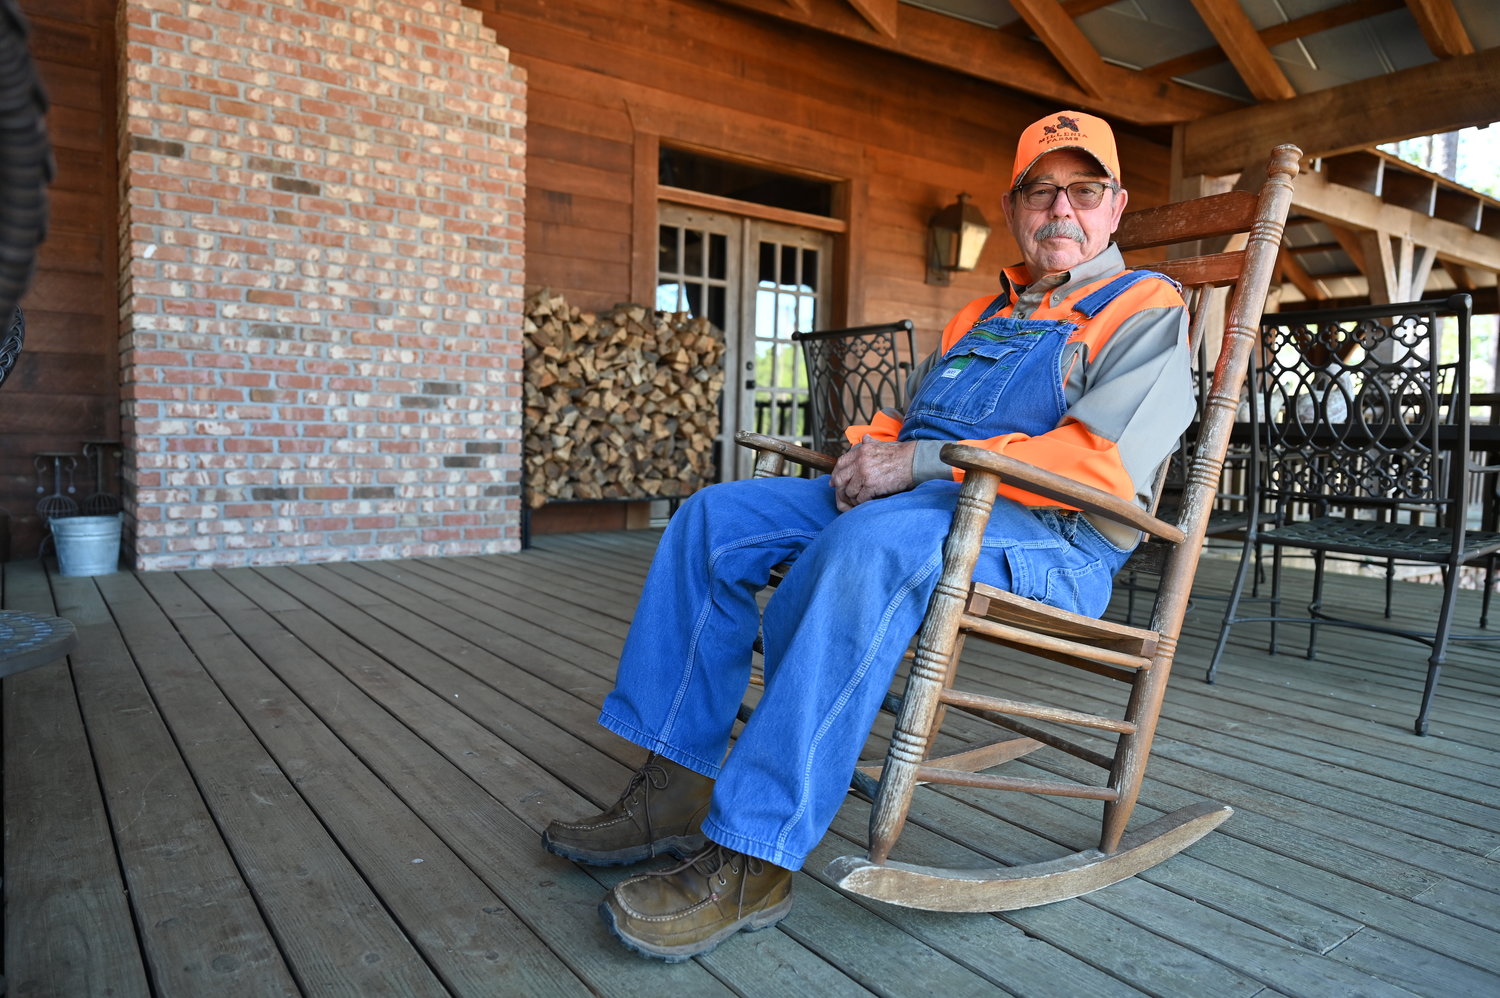 Gary Thrash, a retired homebuilder, poses for a photo on the porch of the lodge at Millennia Farms in Sumner, Ga., on Monday, February 6, 2023. (Index/Roger Alford)